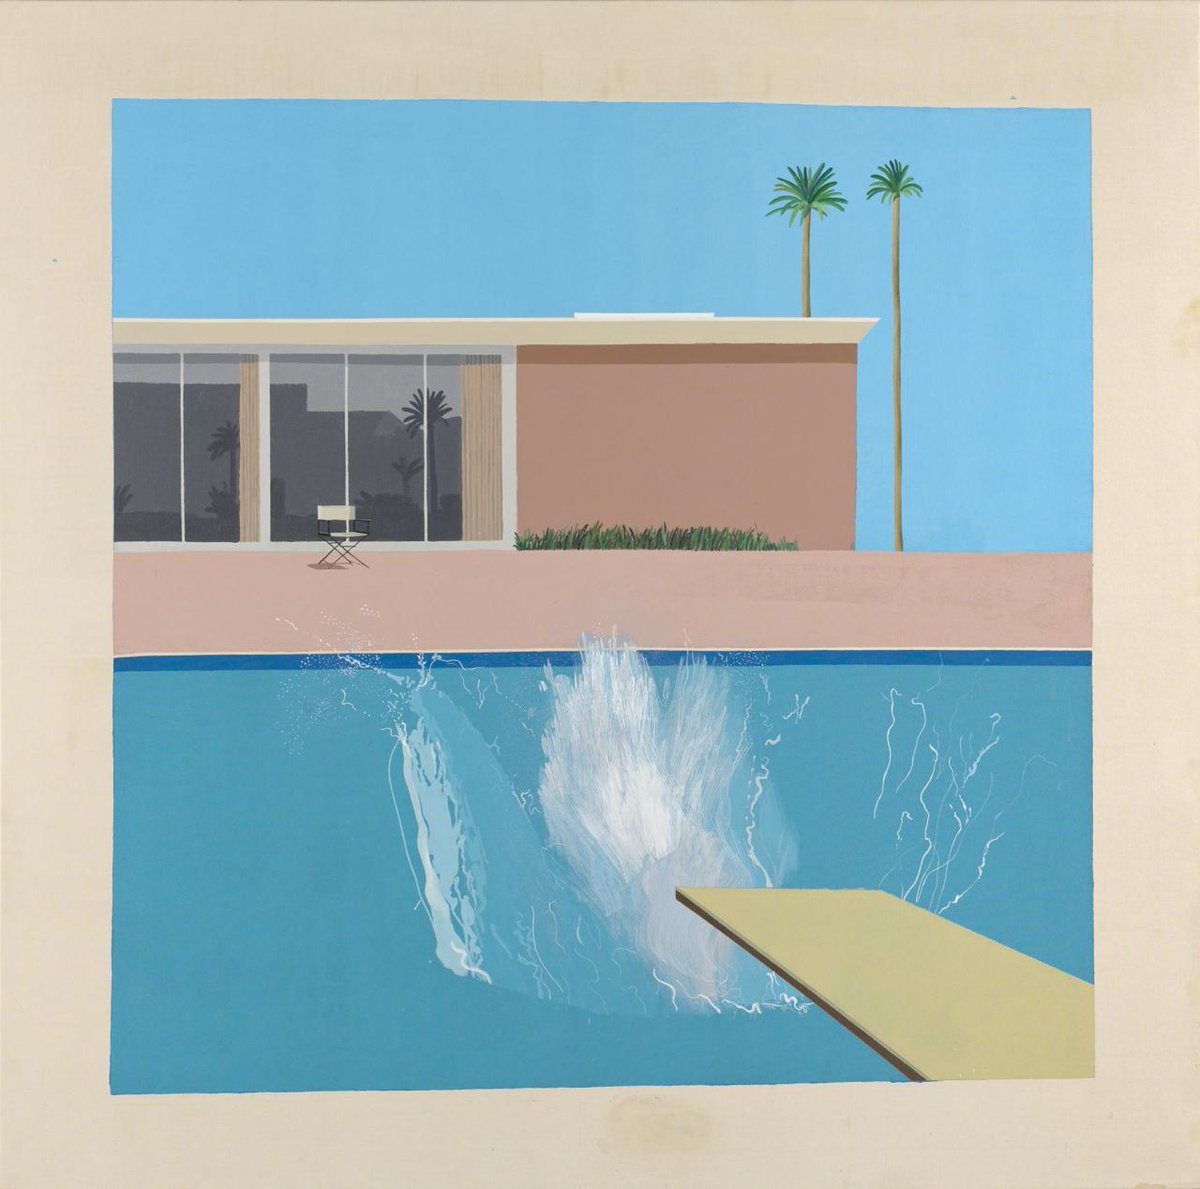 In NNG's video where  #CHANYEOL made Loey Bar, we got to see some of the paintings in their studio. These are both from David Hockney: "A Bigger Splash" and "My Parents".  #찬열